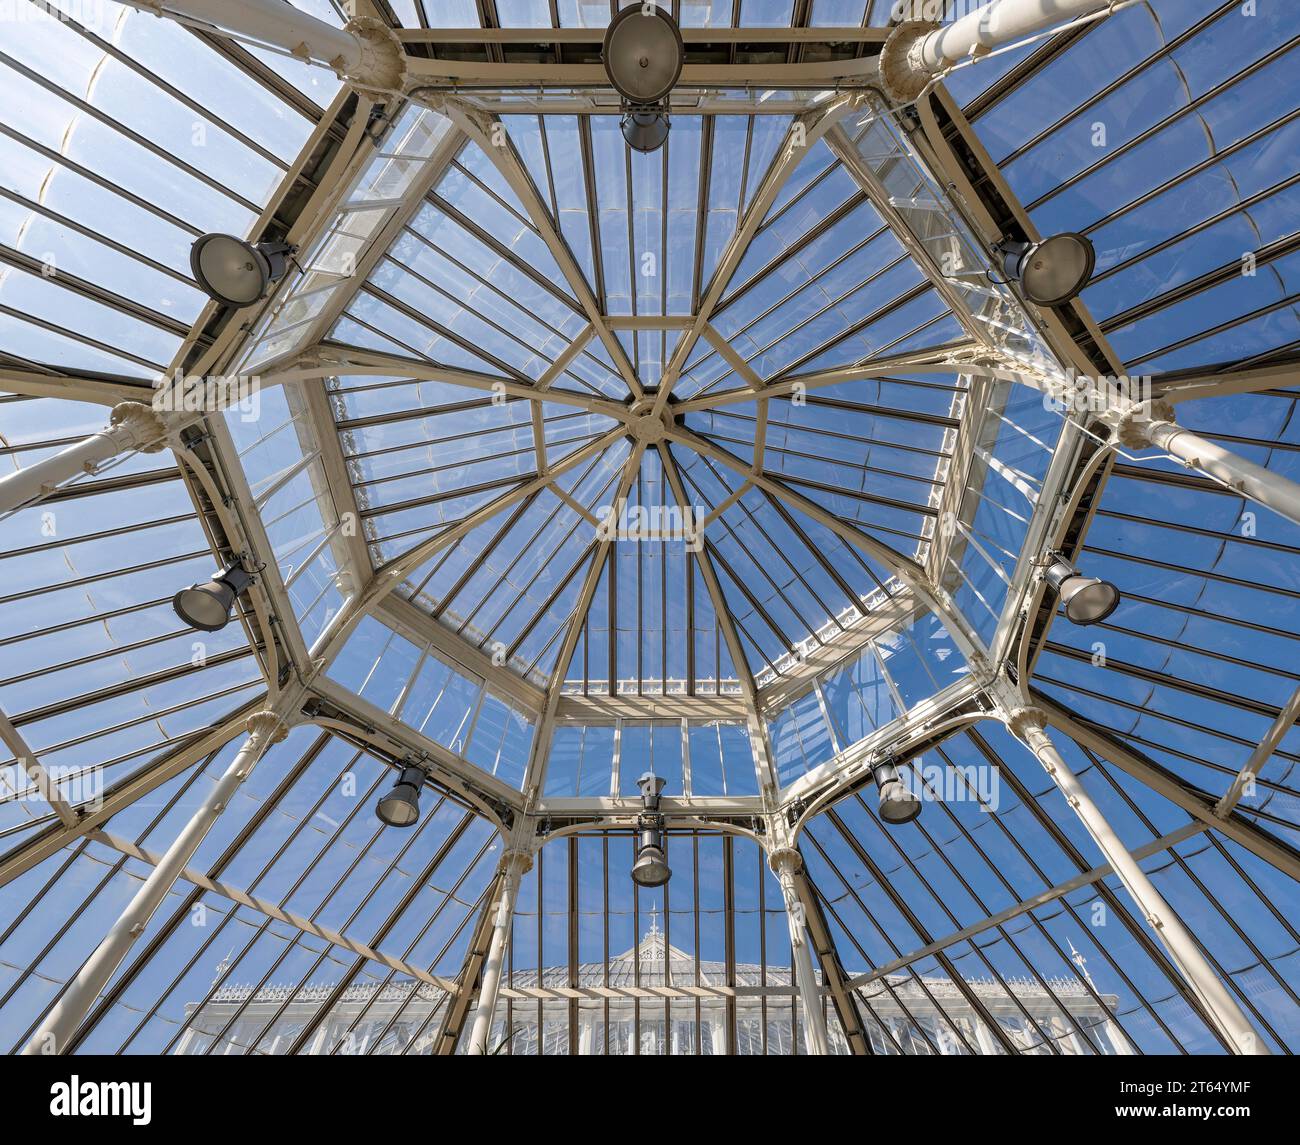 Roof construction, Temperate House, largest Victorian greenhouse in the world, Royal Botanic Gardens (Kew Gardens), UNESCO World Heritage Site, Kew Stock Photo